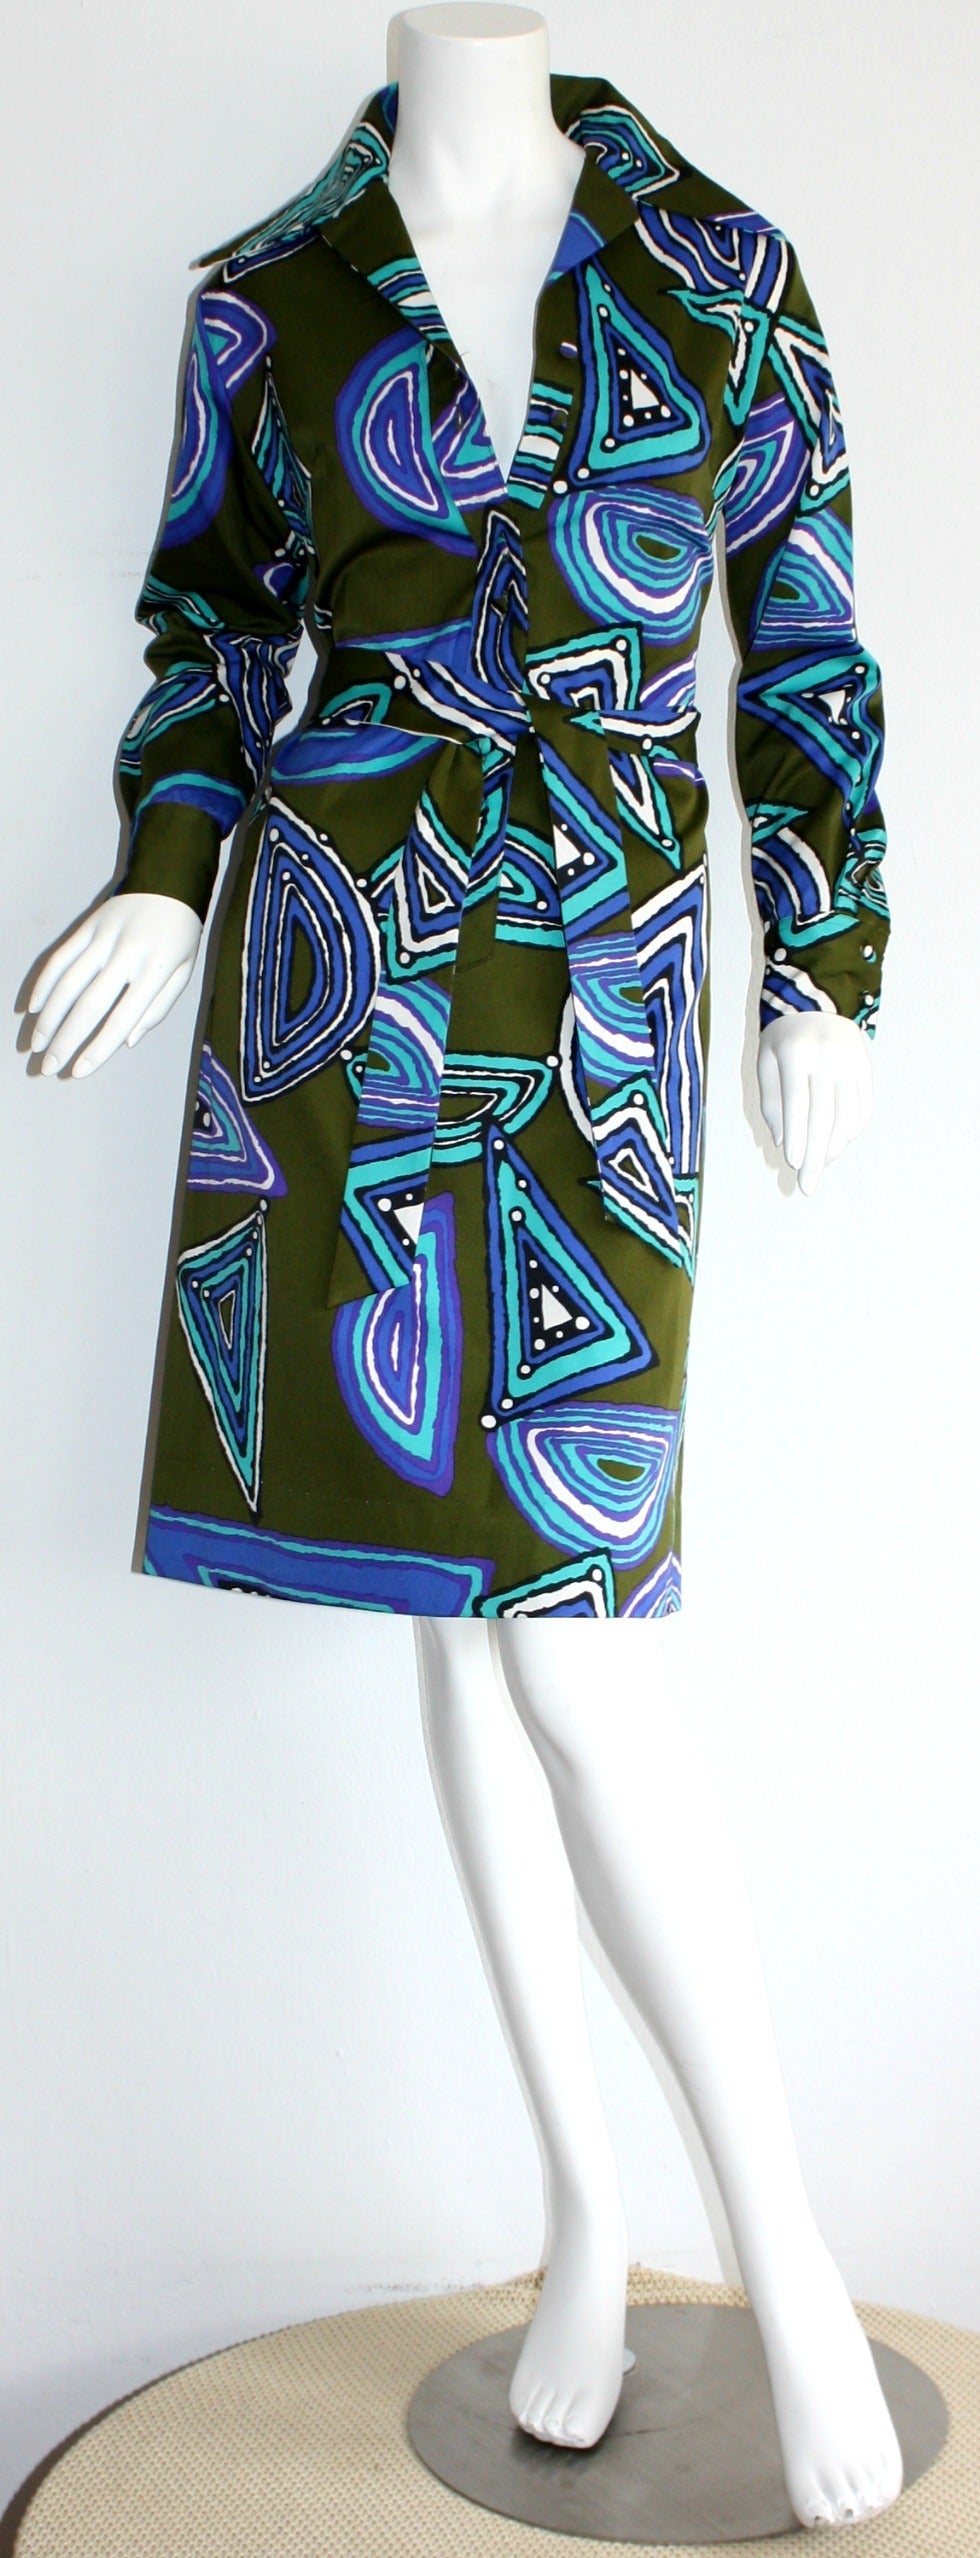 Beautiful vintage Lanvin shirt dress, with detachable tie belt! Vivid green color, with various hues of blue op-art geometric prints throughout. Buttons up the bodice, and at cuffs. Can be worn a number of ways, casual or dressy. Looks great with